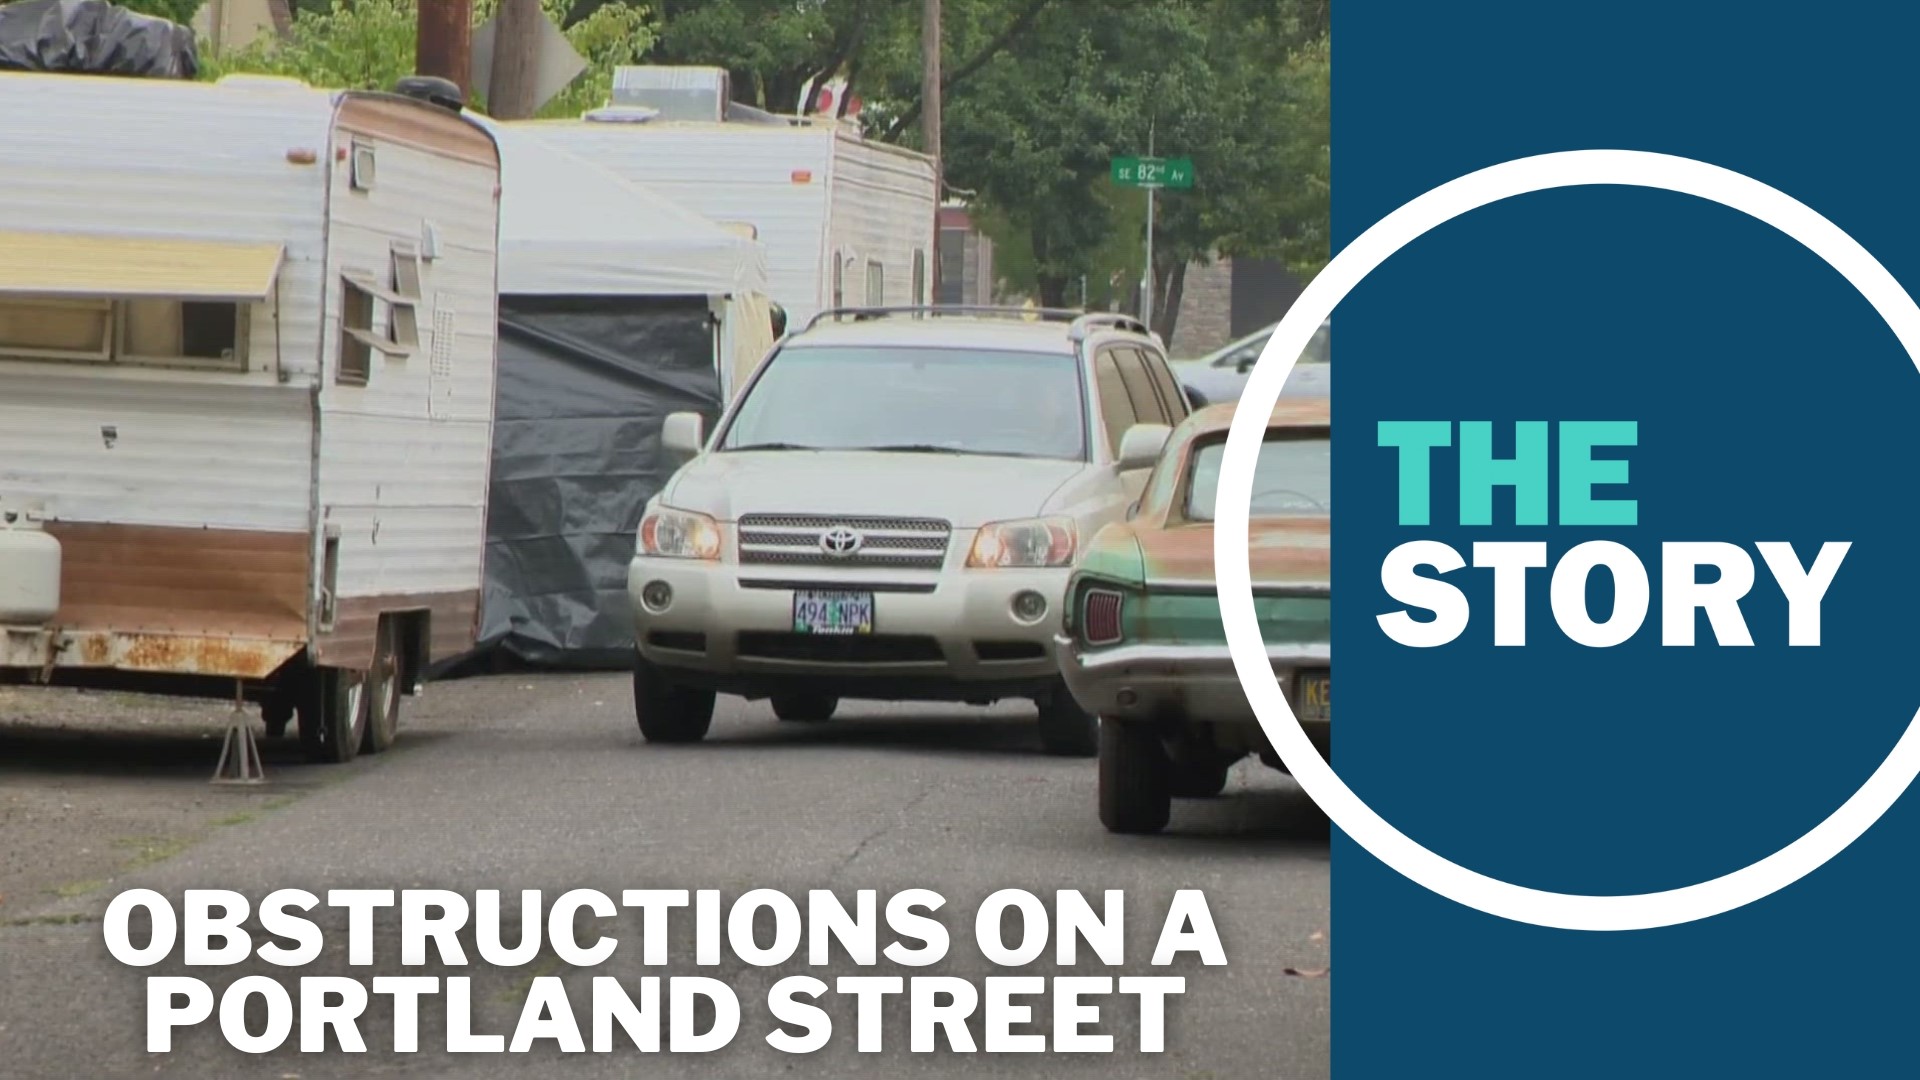 Neighbors fear that the new congestion on their quiet dead-end street will prevent emergency vehicles from responding. It has already impacted access to the street.